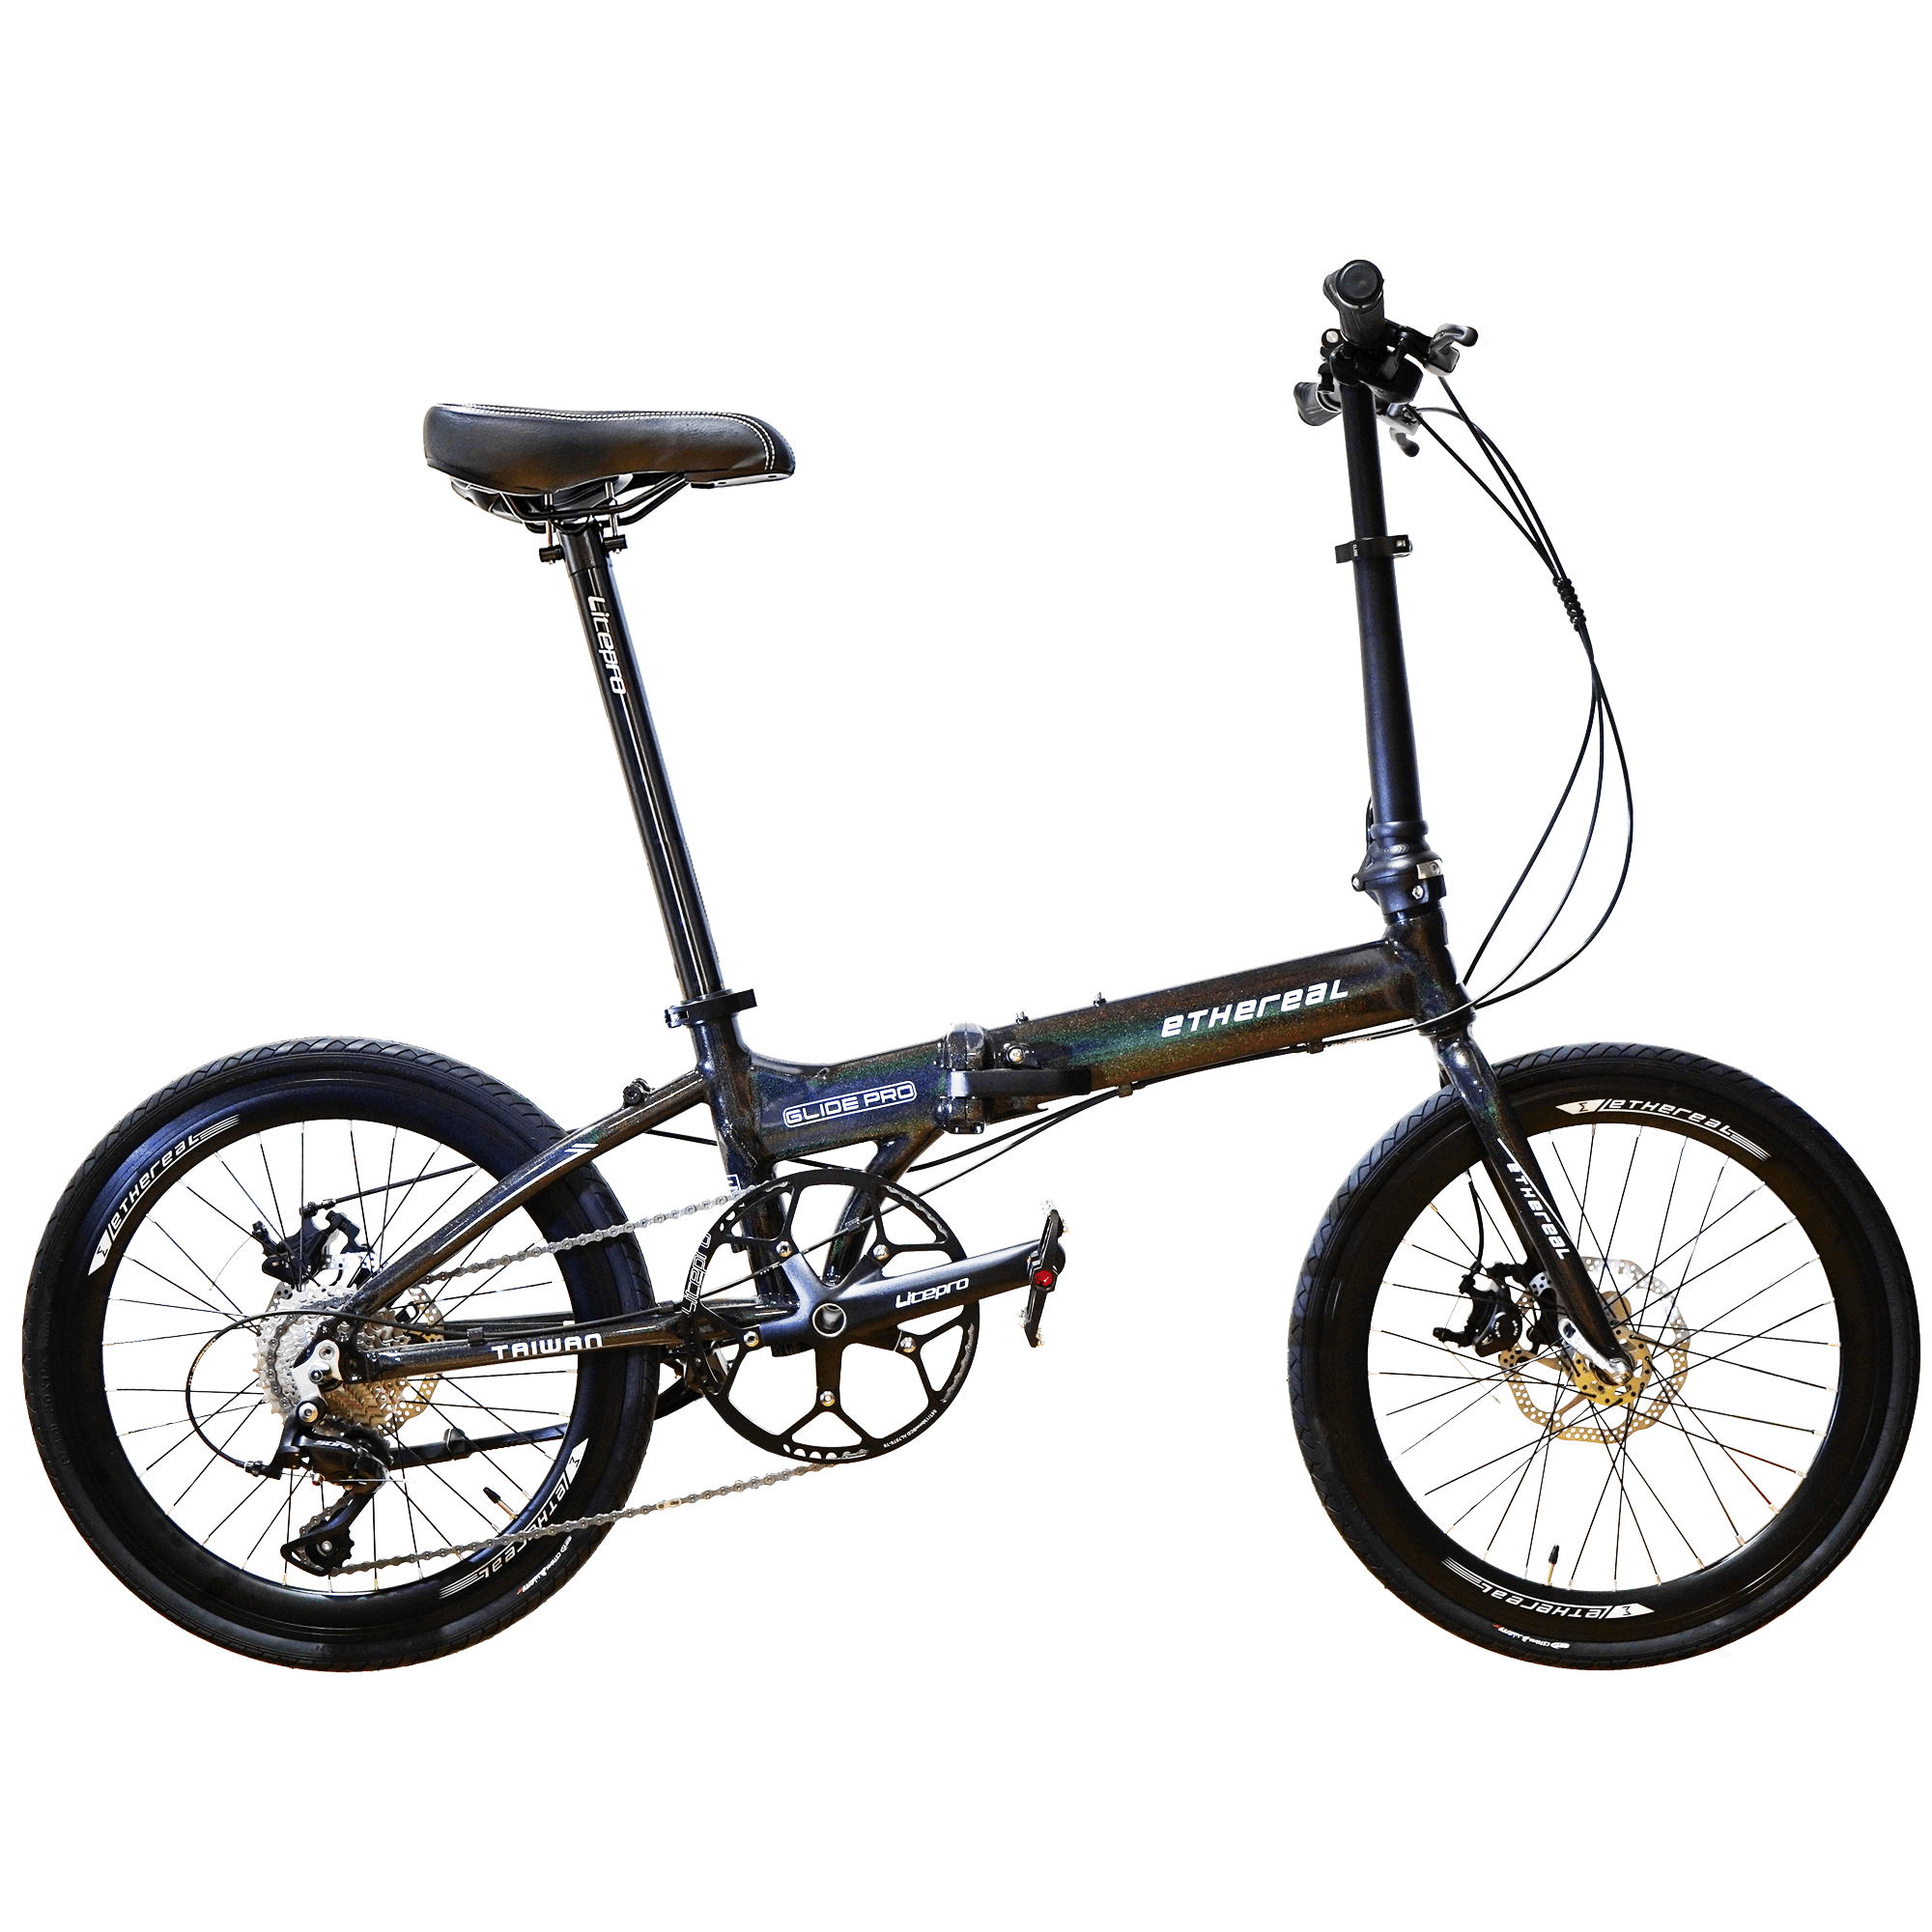 Foldable Ethereal Glide PRO Bicycle with Shimano Sora & Altus 9-Speed, Lightweight Aluminum Frame, and Zoom X-Tech Brakes - The Bike Atrium - Best Bicycle Shop in Singapore